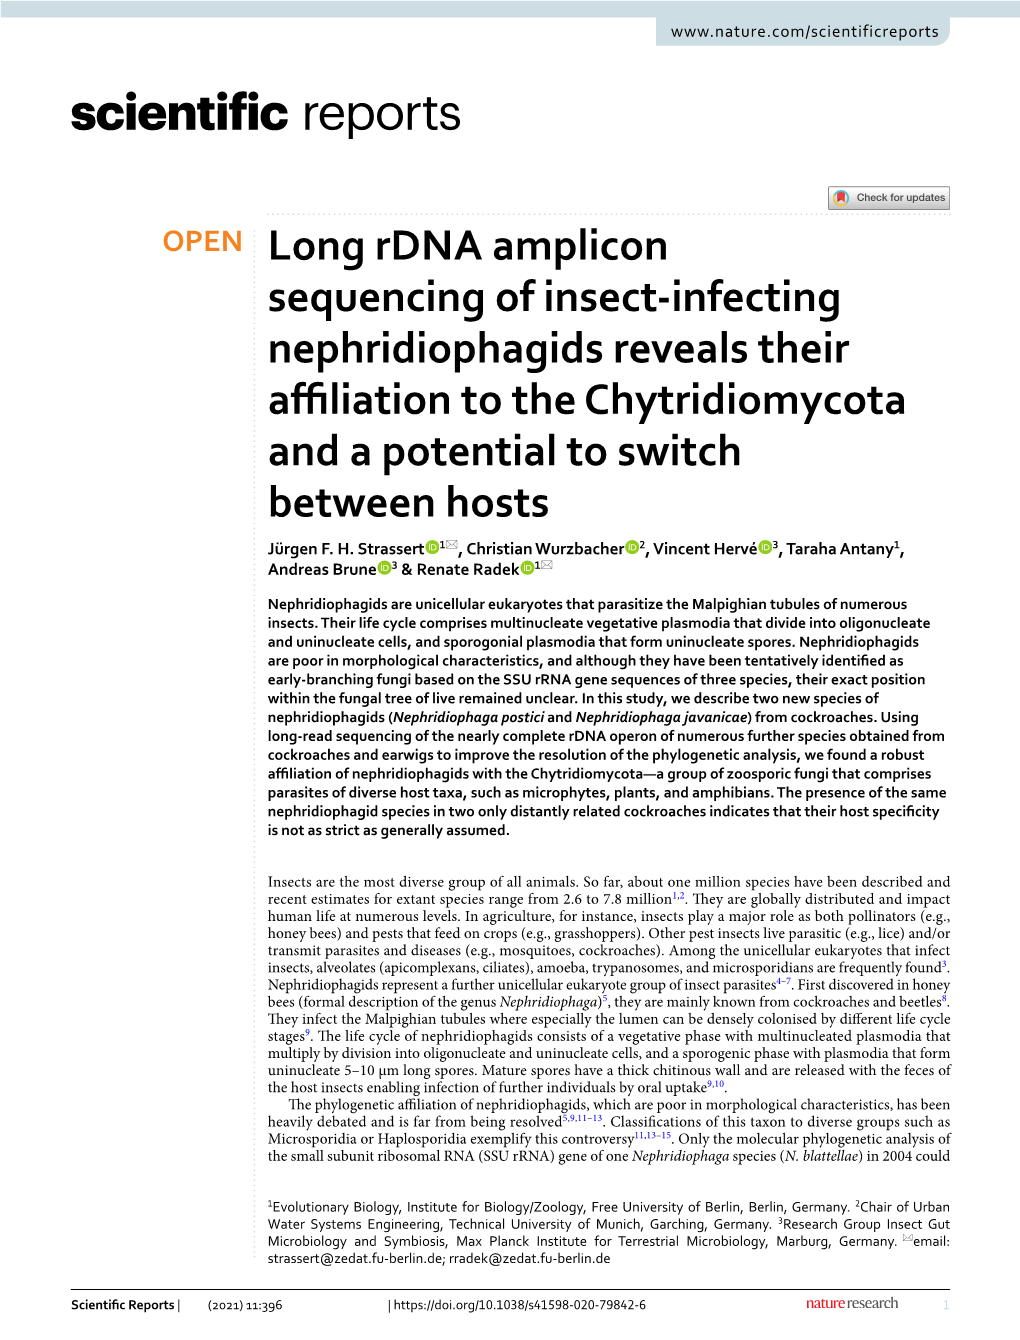 Long Rdna Amplicon Sequencing of Insect-Infecting Nephridiophagids